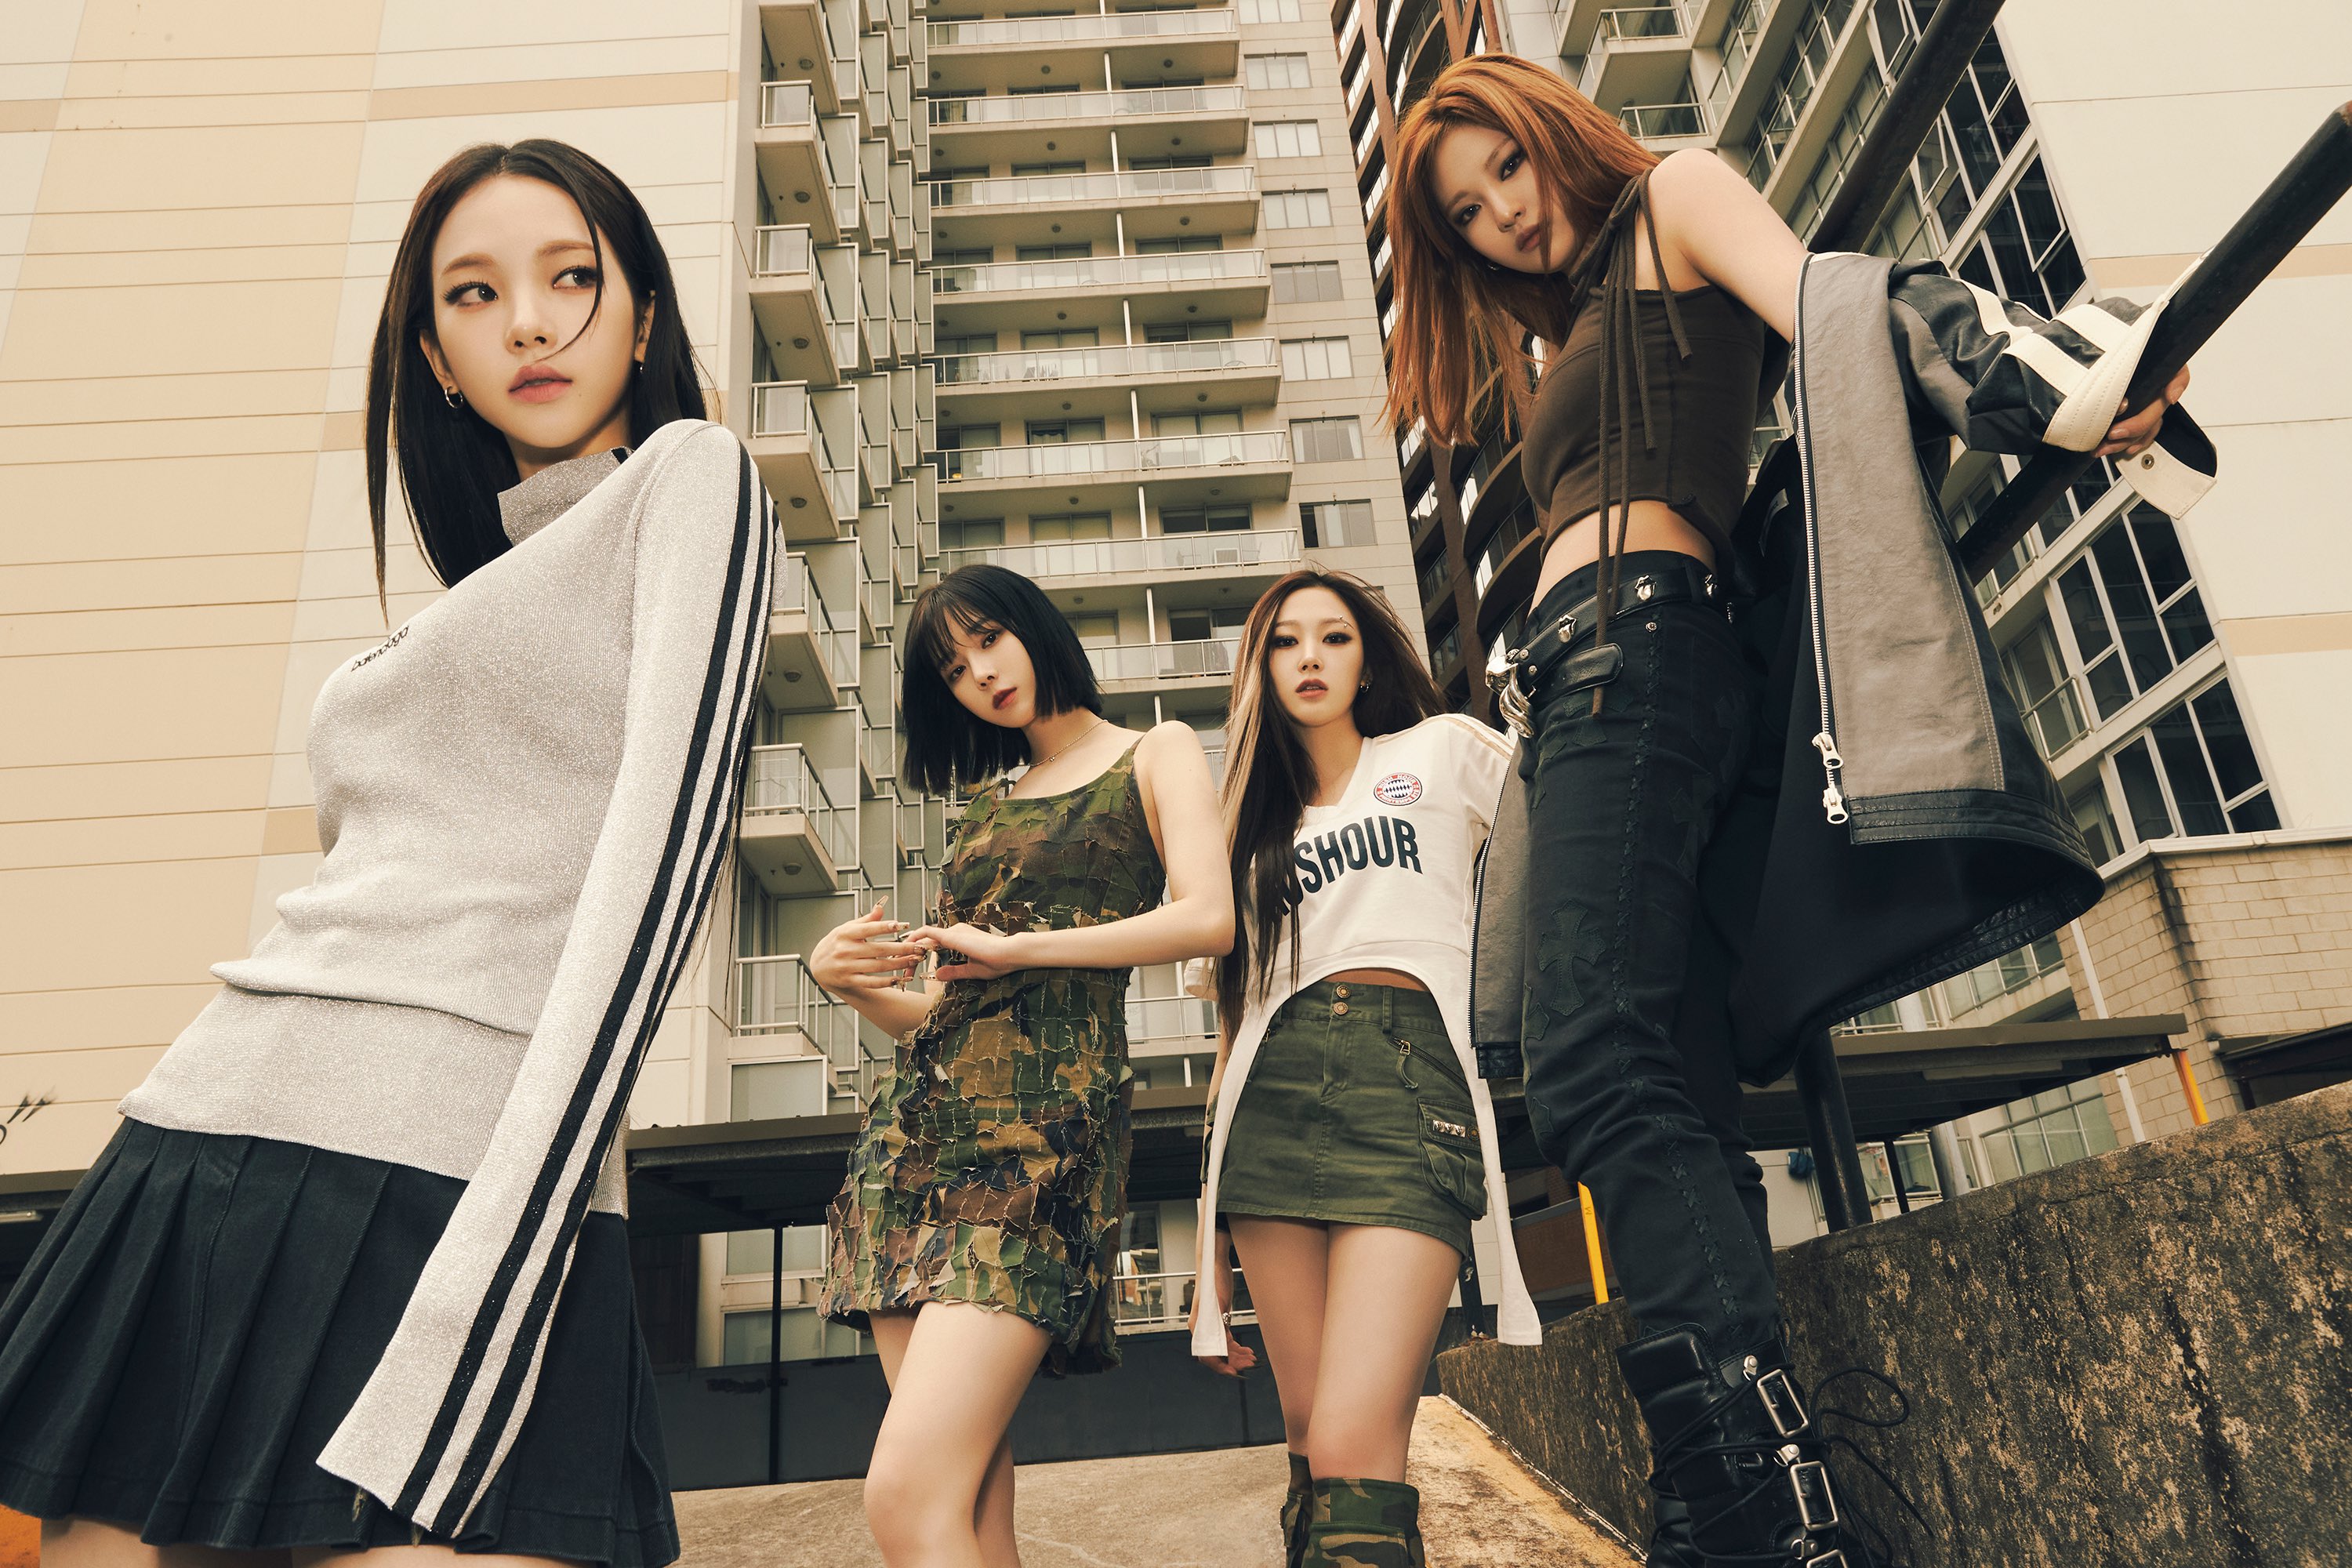 aespa to Comeback with 3rd Mini-Album 'My Word' on May 8